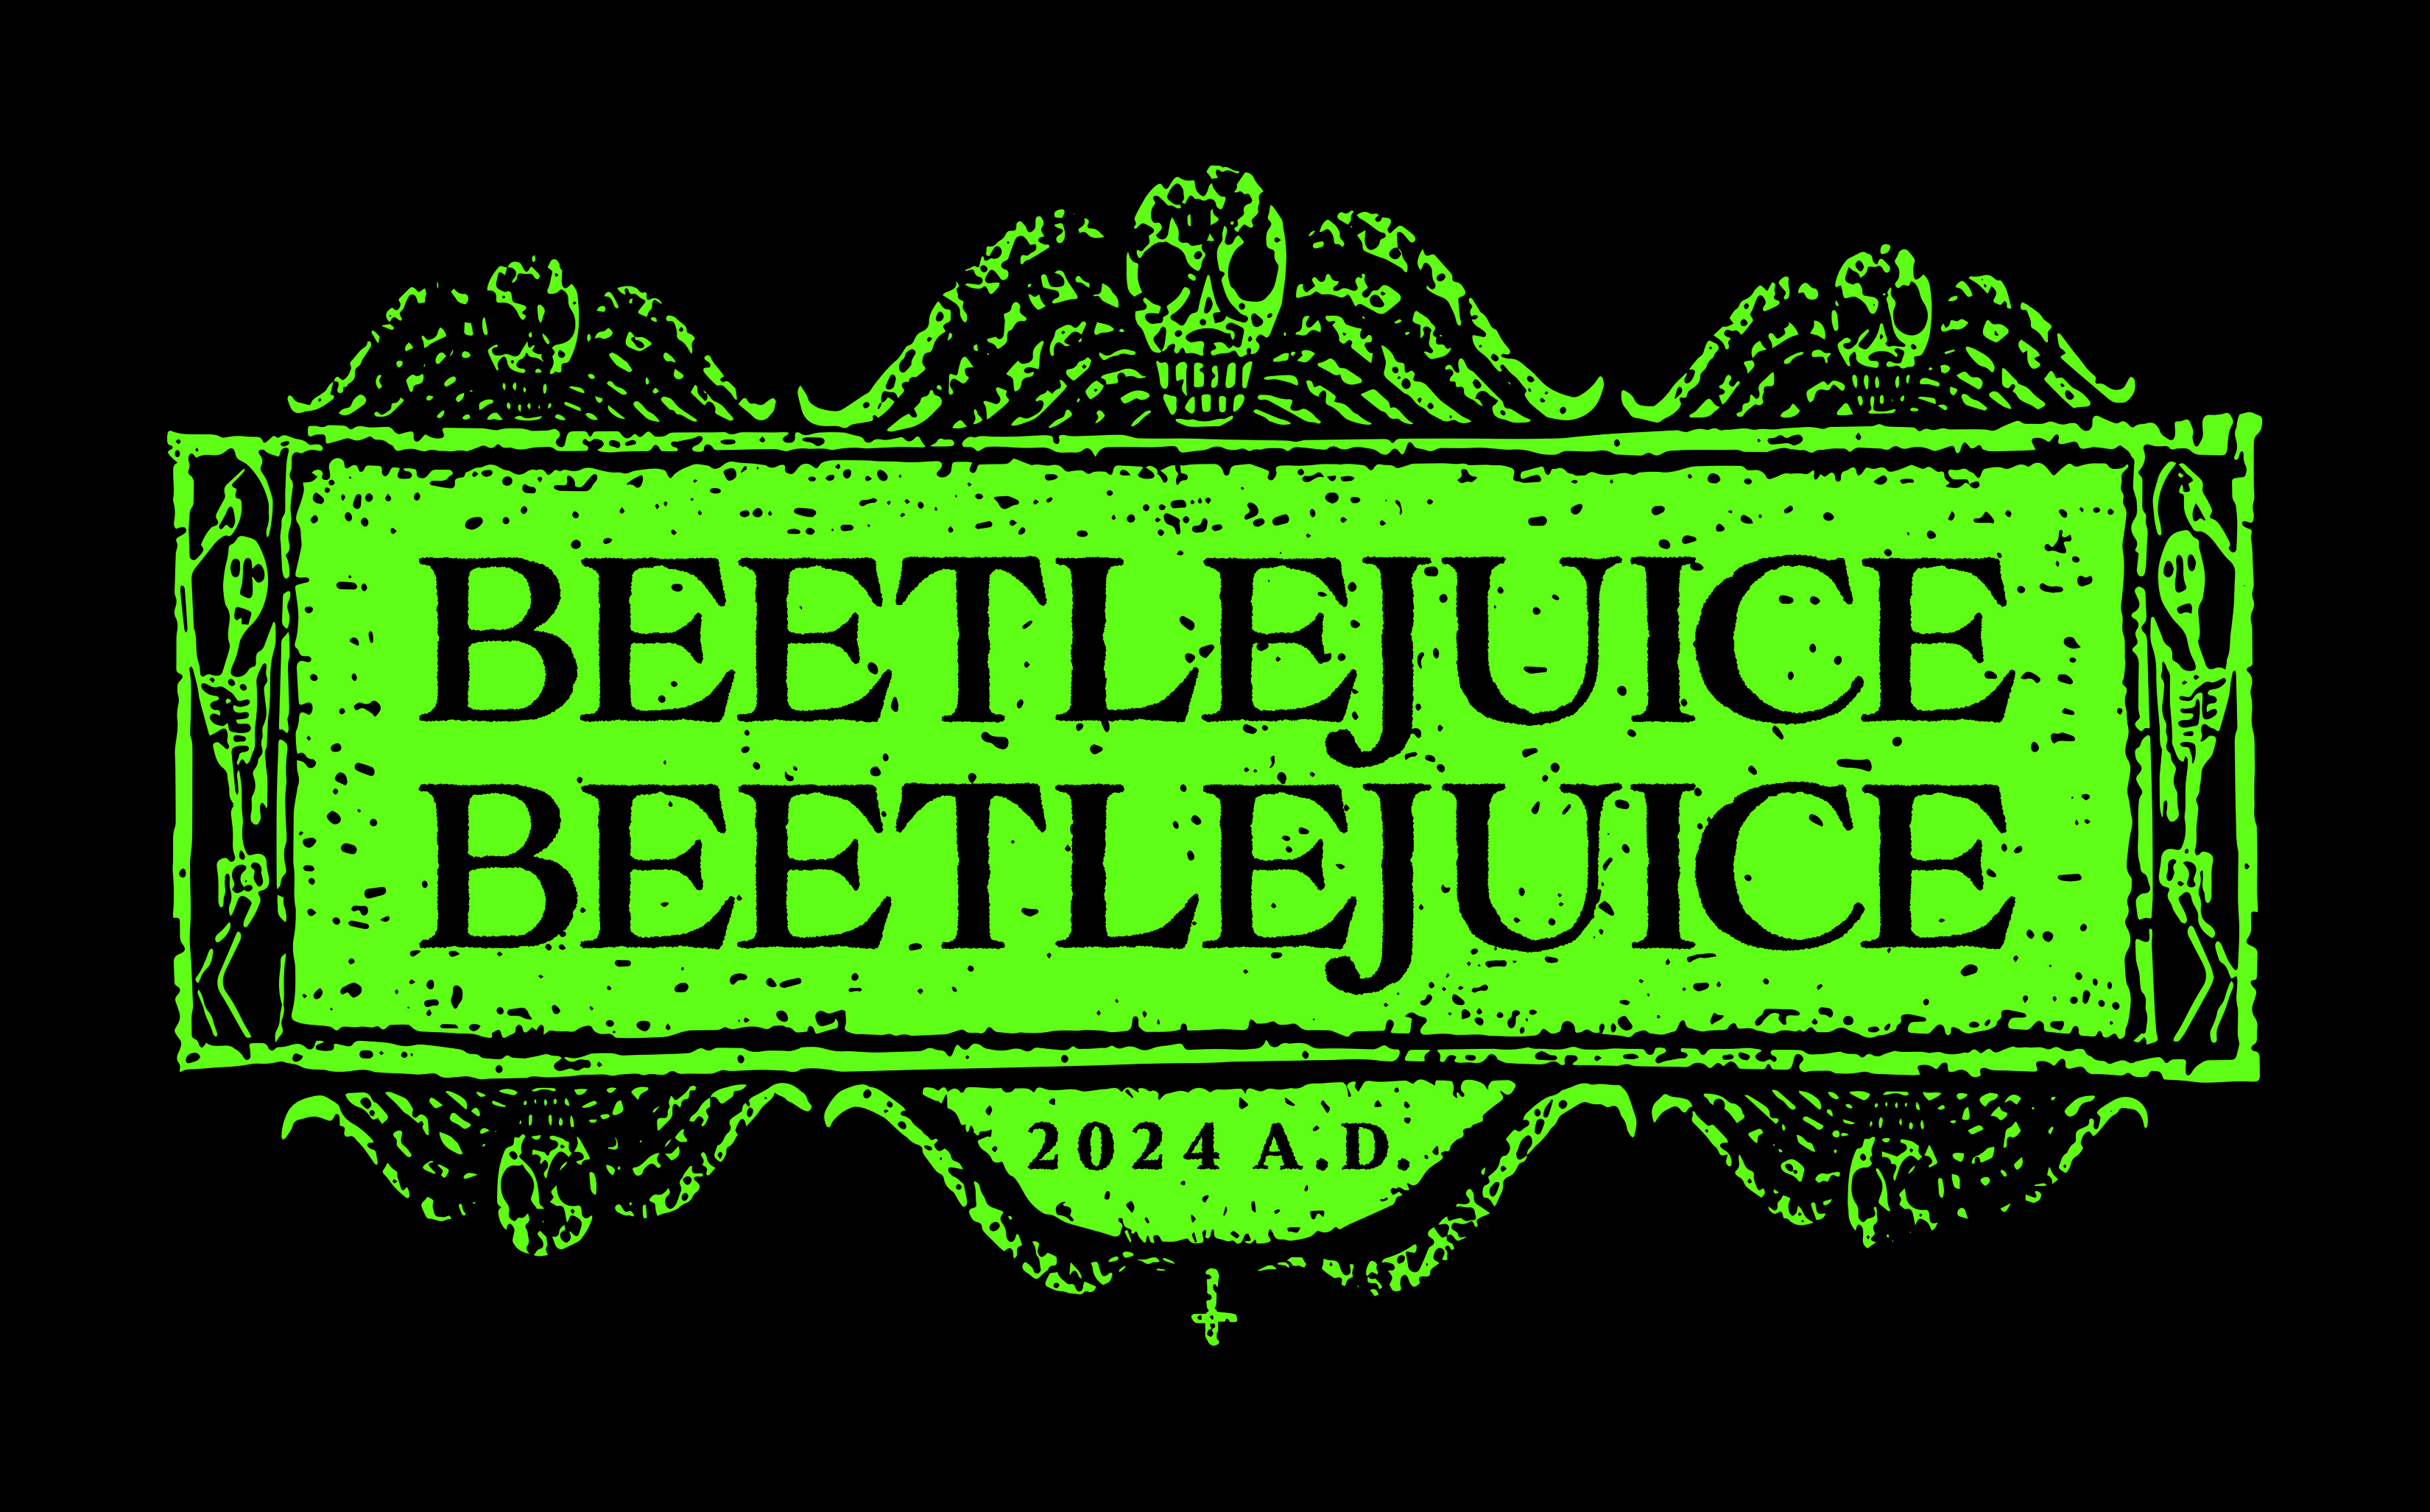 The &quot;Beetlejuice Beetlejuice&quot; poster